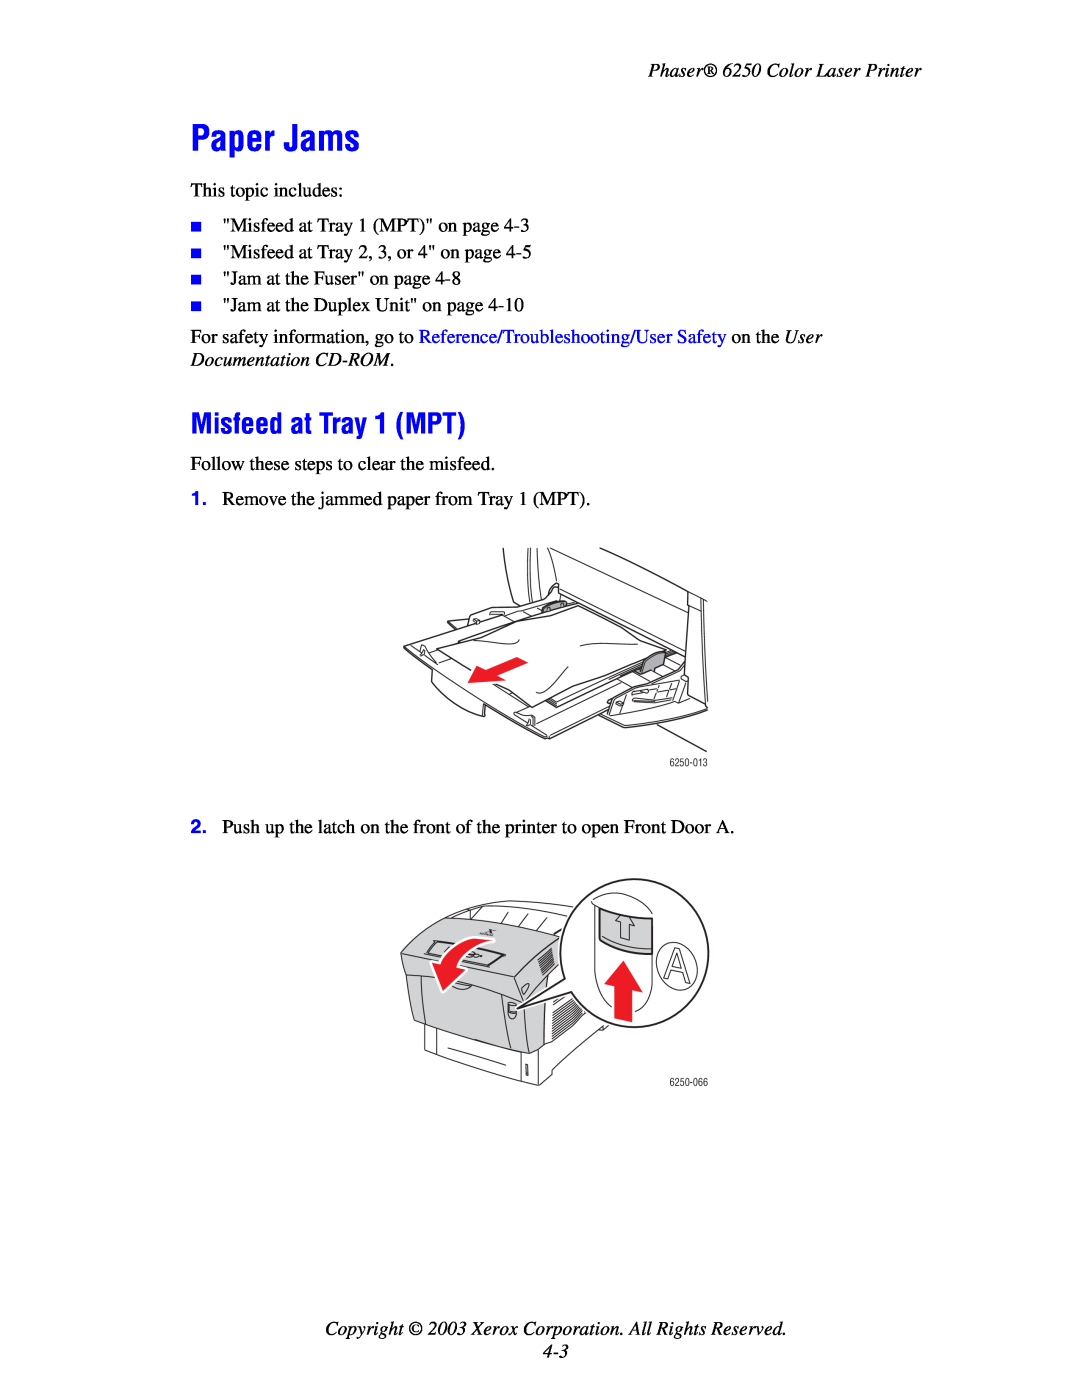 Xerox 6250 manual Paper Jams, Misfeed at Tray 1 MPT, Copyright 2003 Xerox Corporation. All Rights Reserved 4-3 